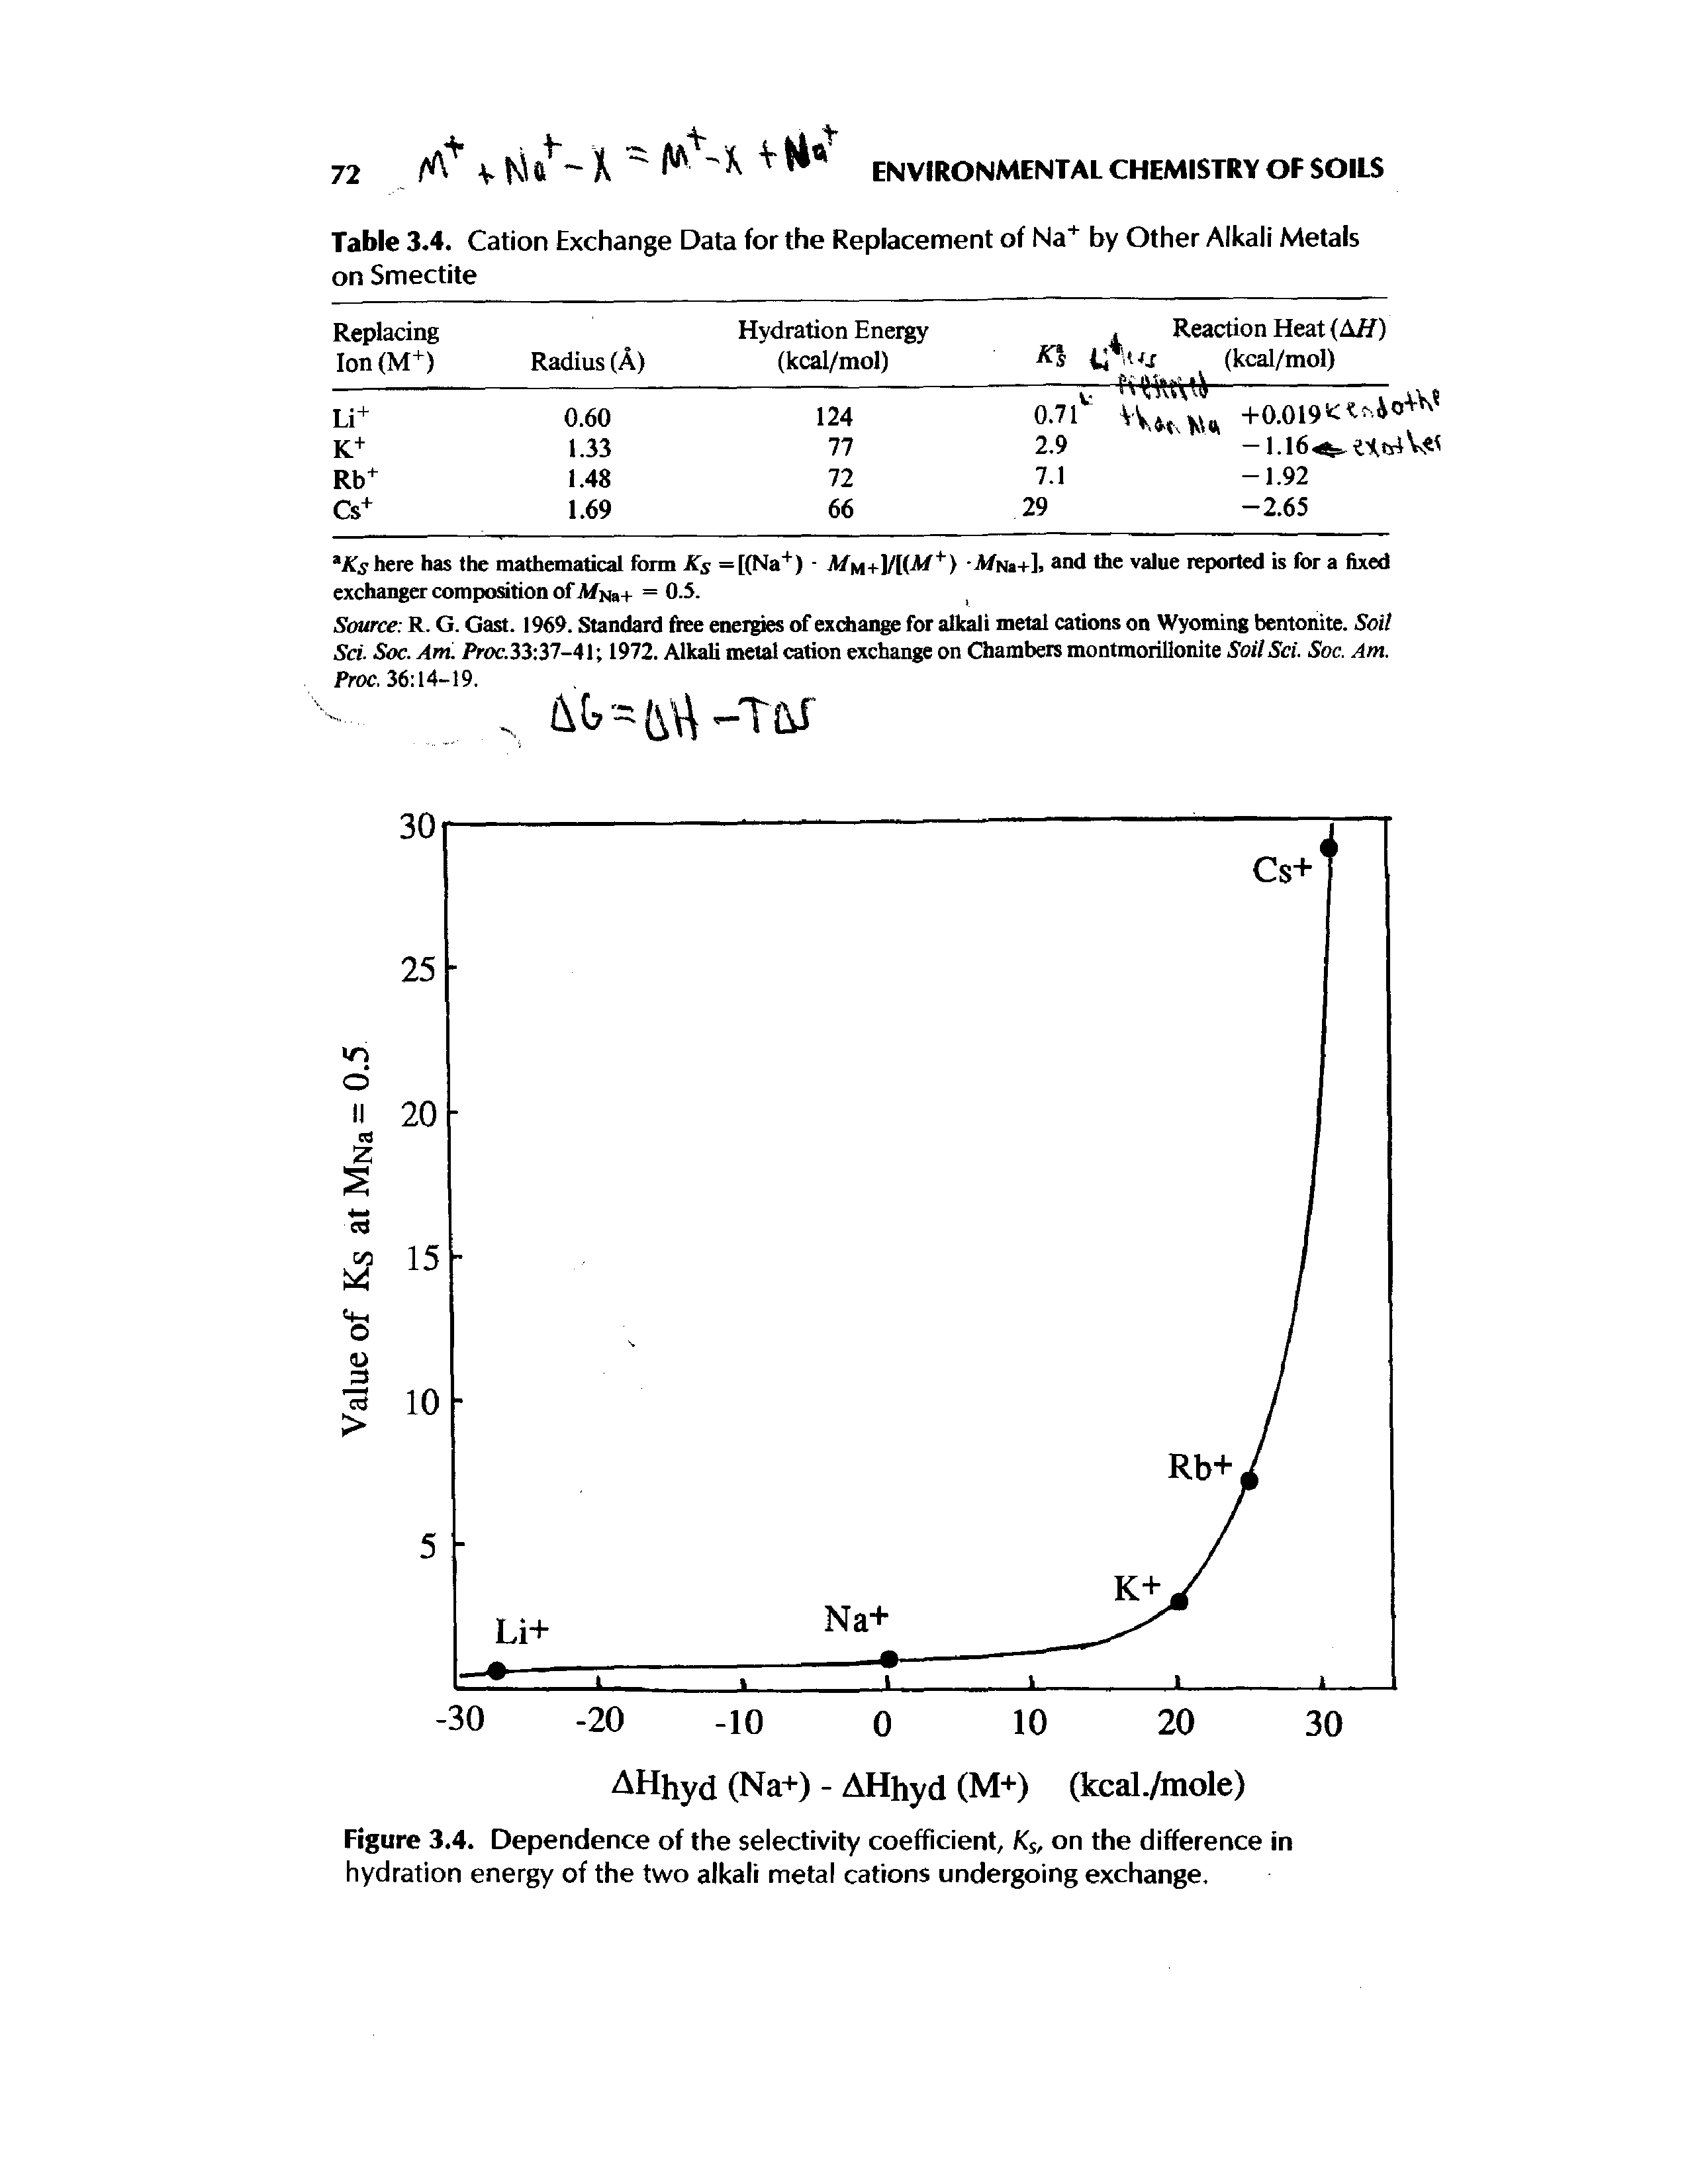 Figure 3.4. Dependence of the selectivity coefficient, Ks, on the difference in hydration energy of the two alkali metal cations undergoing exchange.